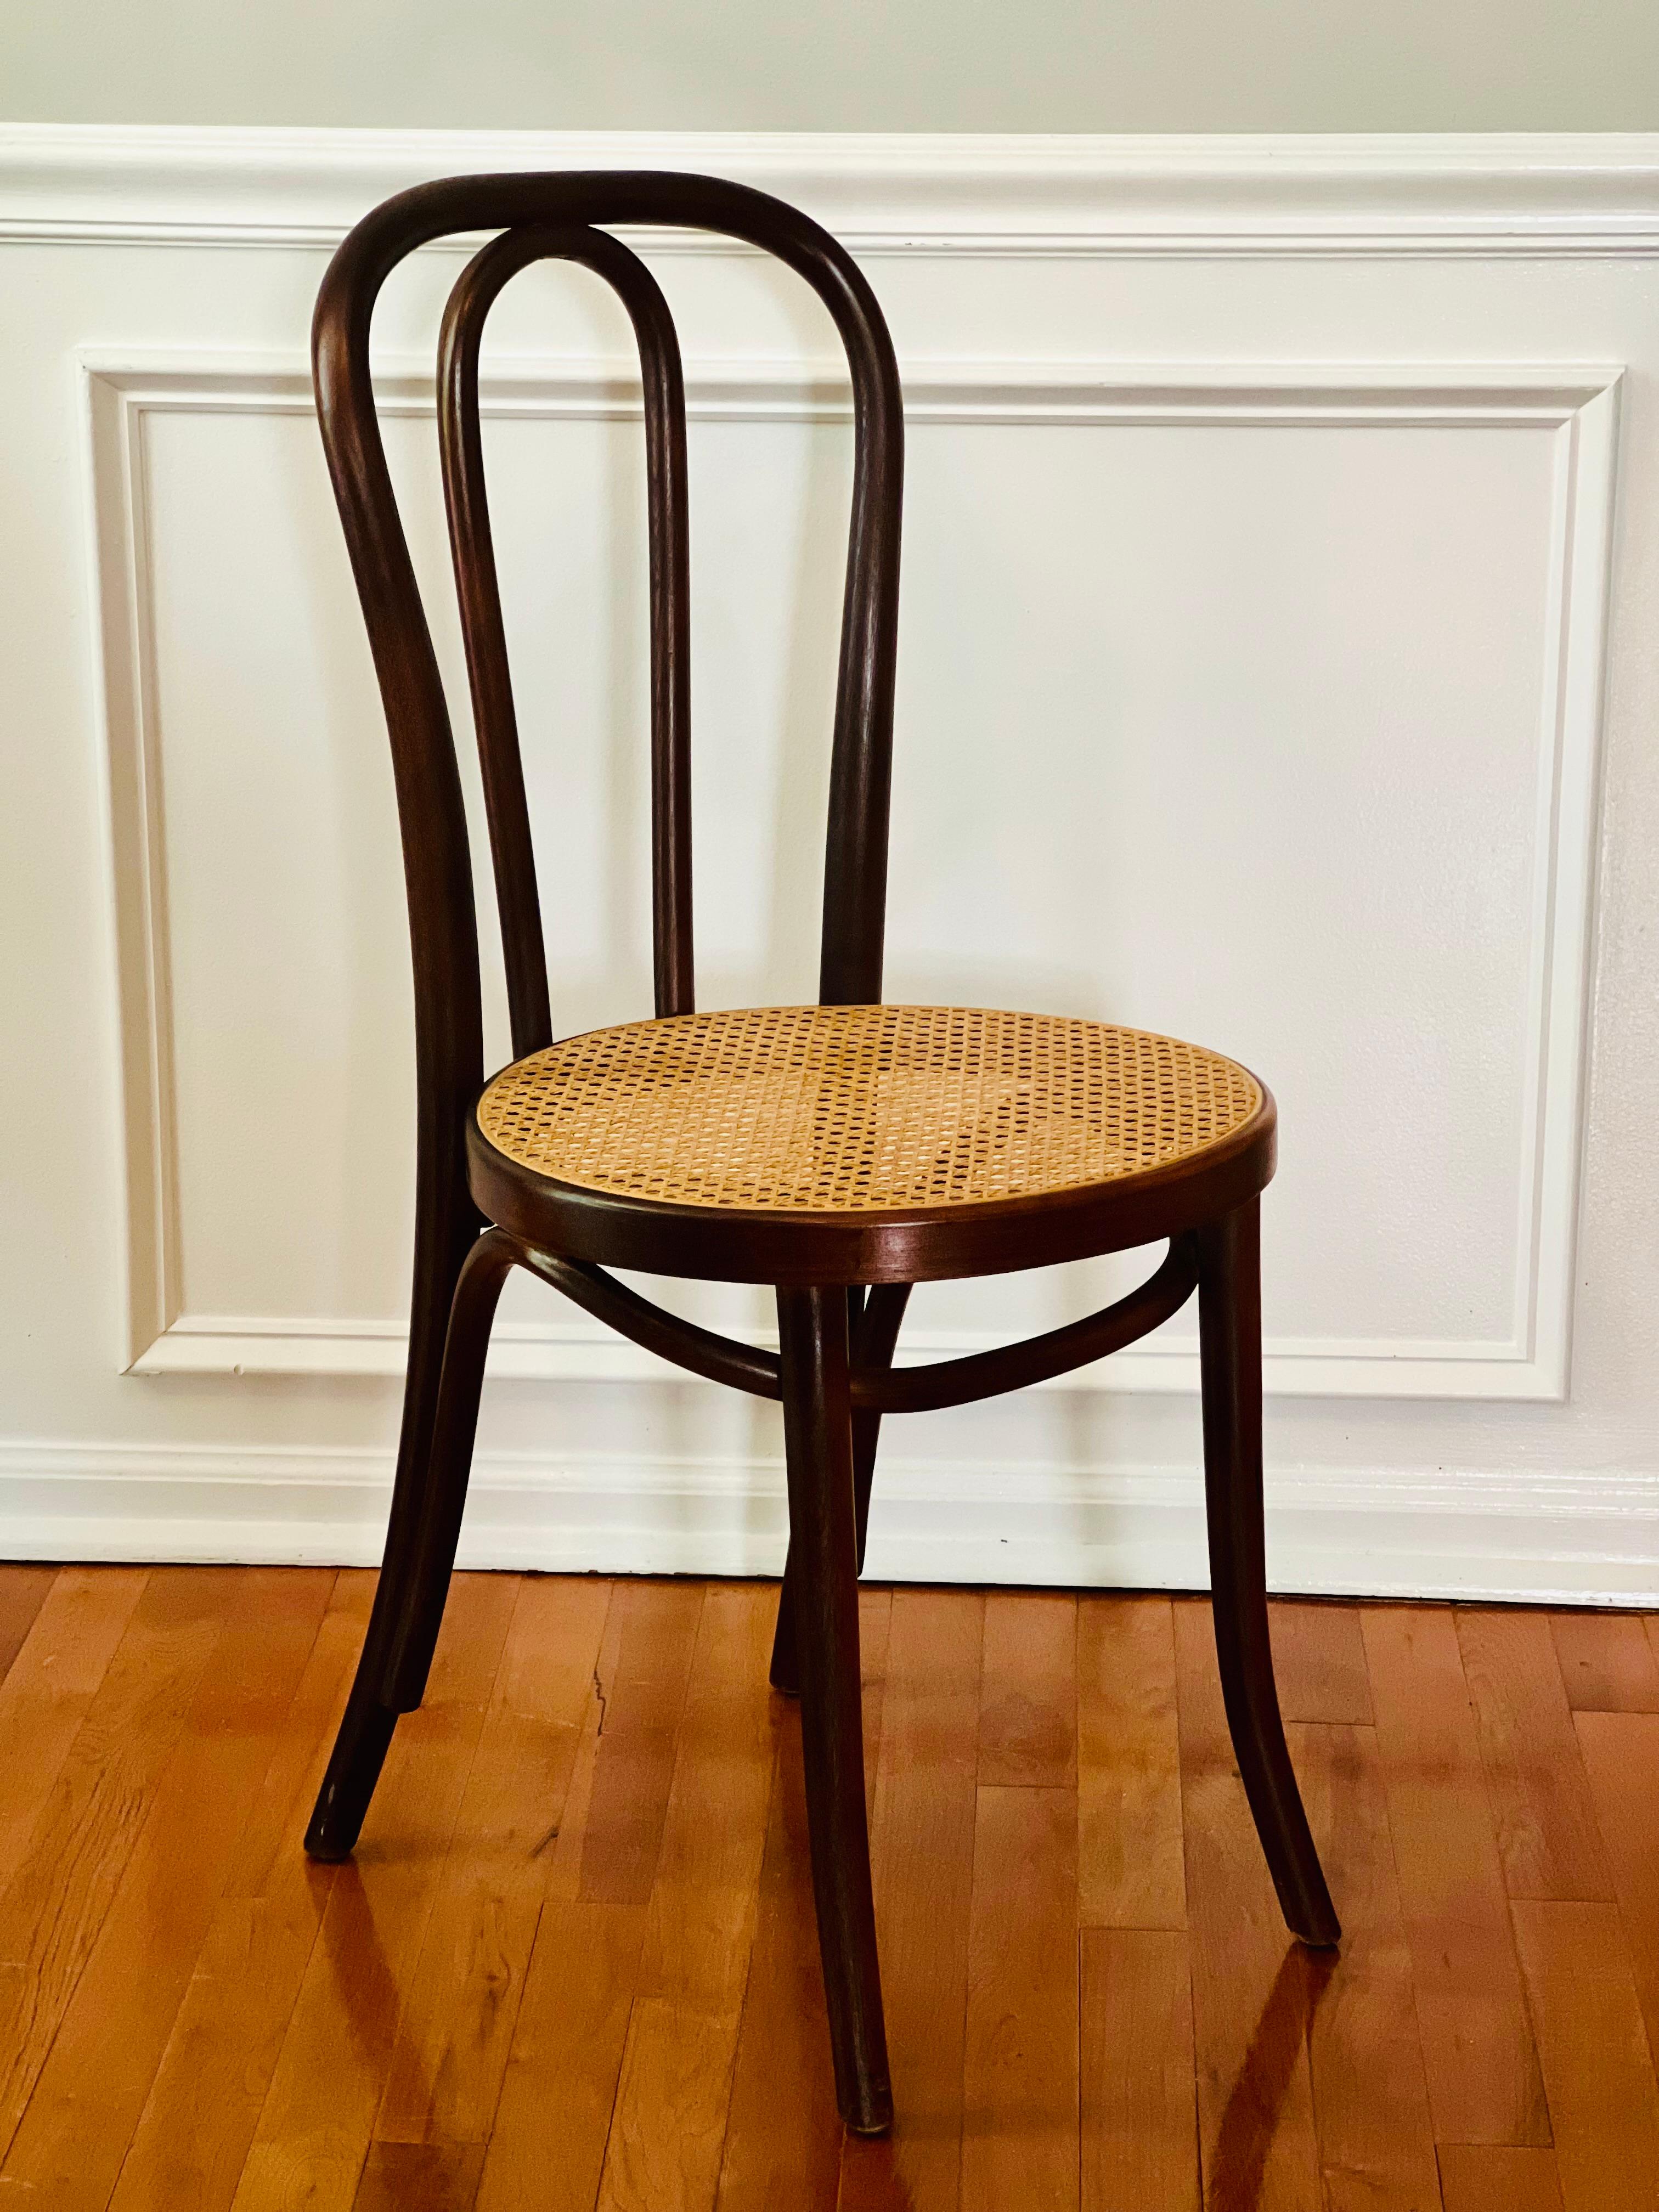 Thonet Bentwood Cane Bistro or Side Chair, 1920's For Sale 7